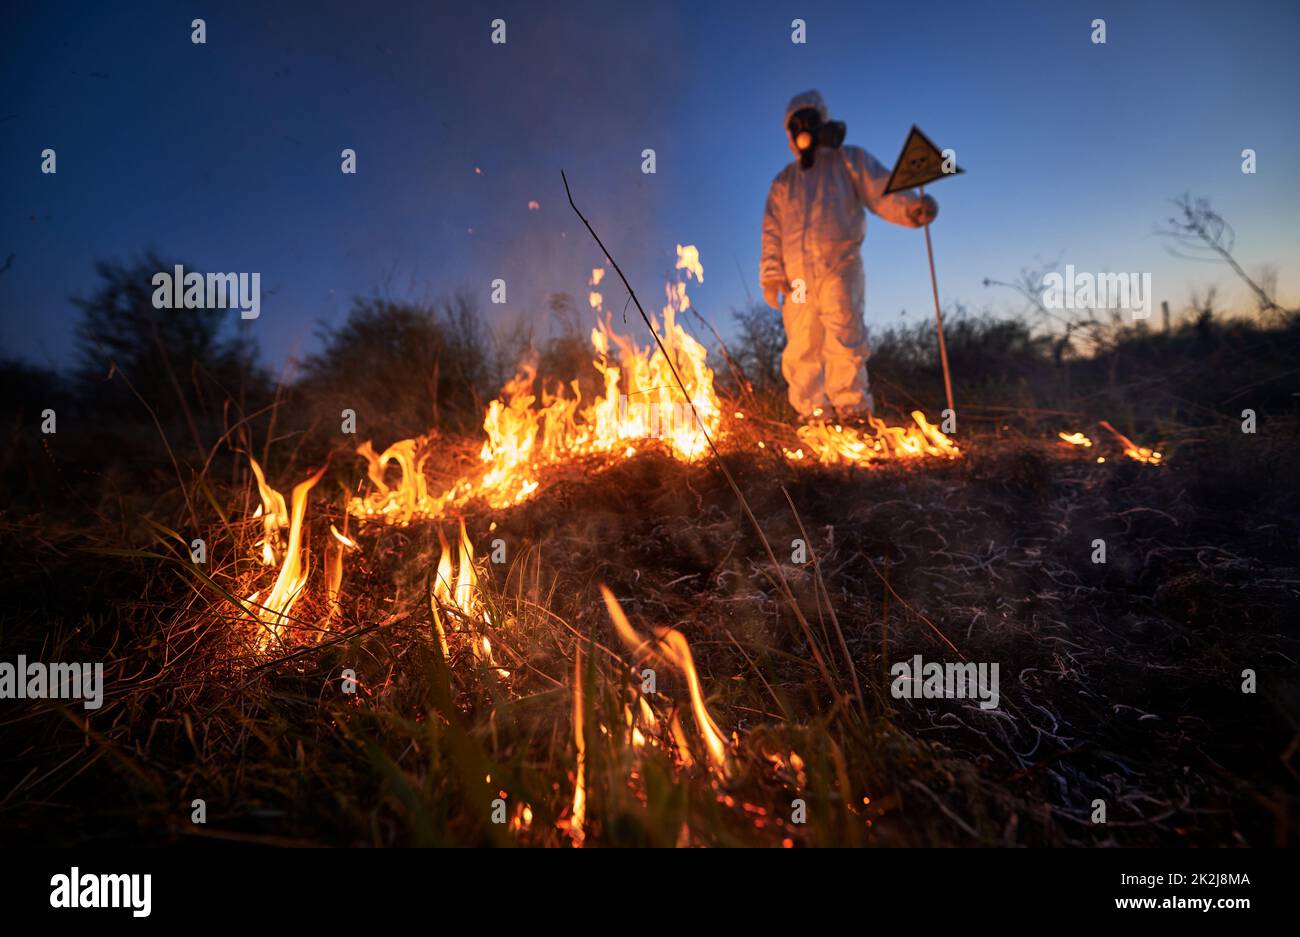 Fireman ecologist working in field with wildfire at night. Man in protective radiation suit and gas mask near burning grass with smoke, holding warning sign. Natural disaster concept. Stock Photo